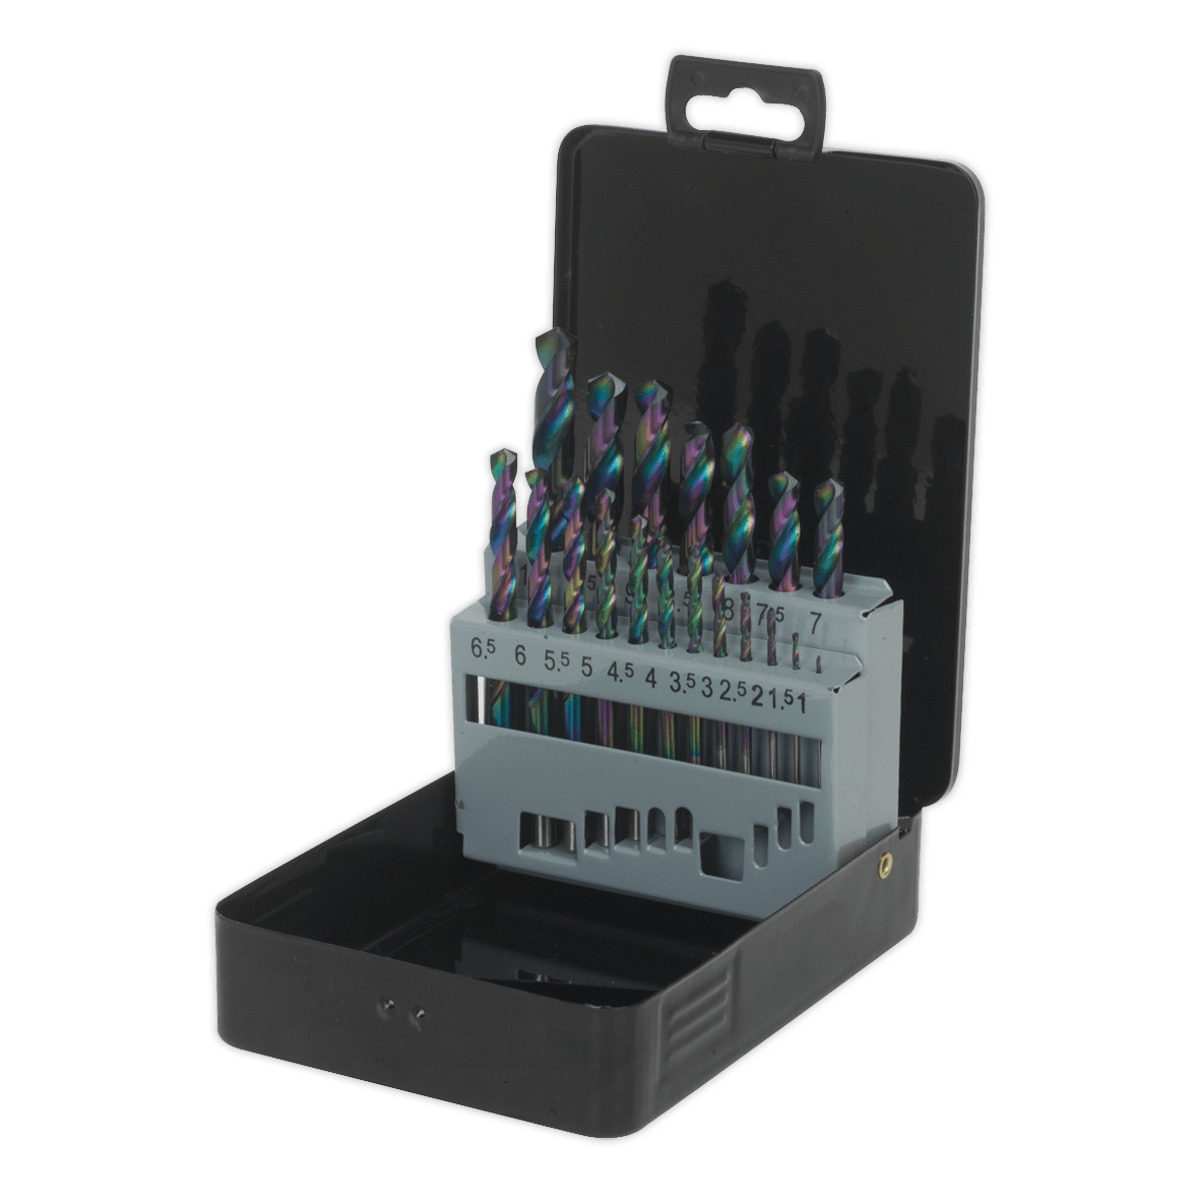 HSS Drill Bit Set 19pc Edge Ground Metric DIN 338 | Edge ground HSS drill bits manufactured to DIN 338, with a coating to help reduce friction and heat. | toolforce.ie